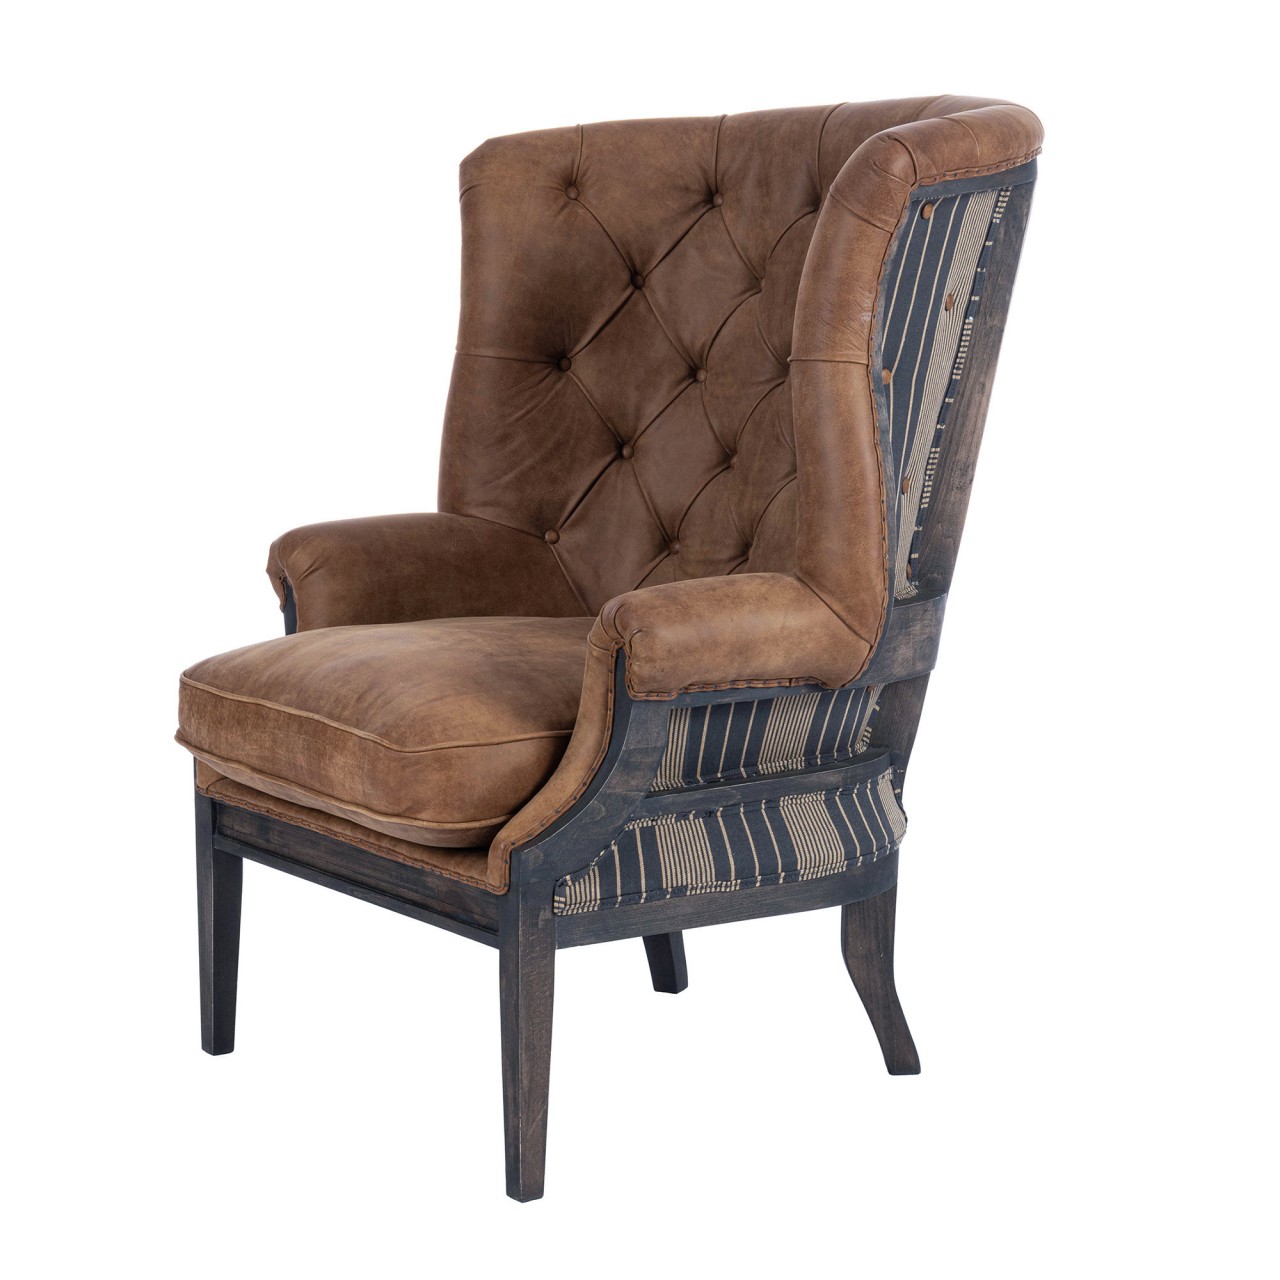 WILLIAM DECONSTRUCTED WING CHAIR (Leather) - NEWPORT STRIPES Heavy Linen Fabric